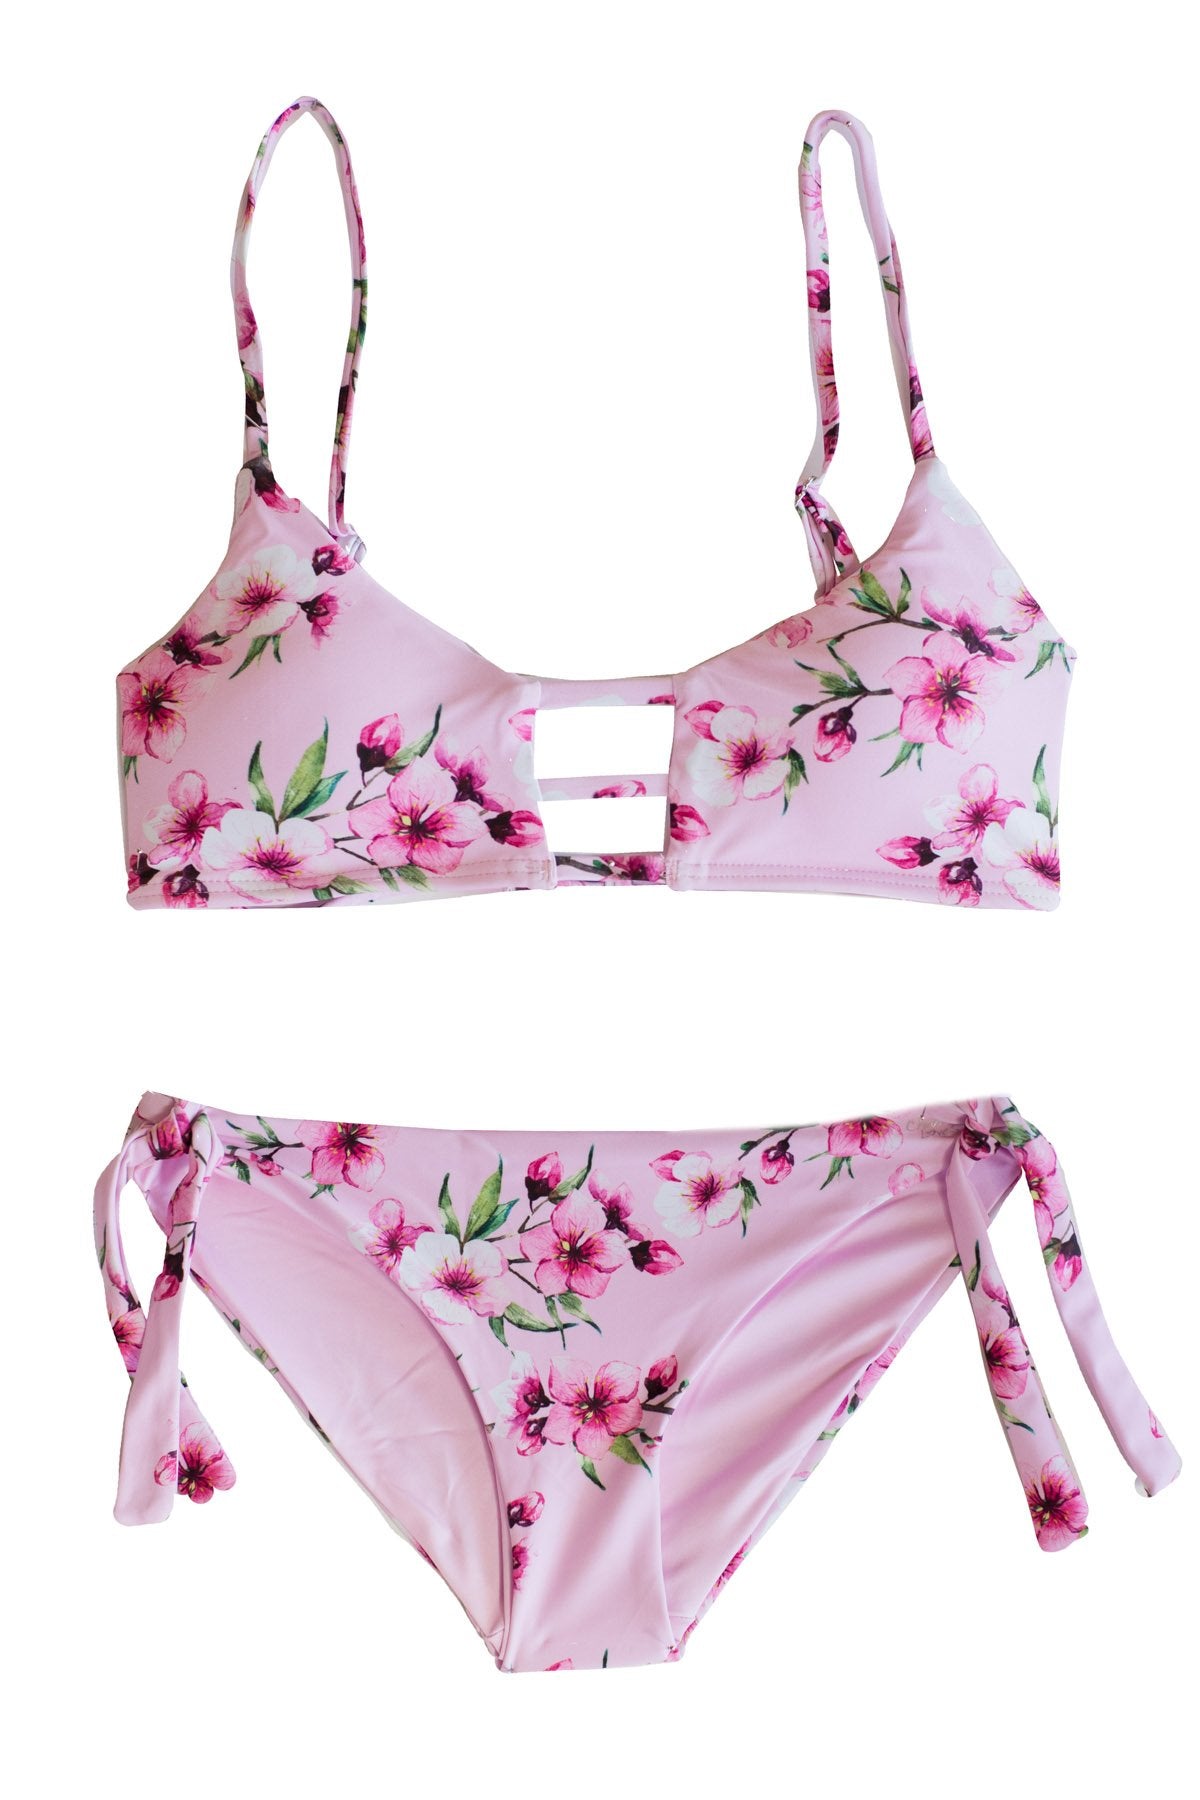 Two Piece Swimsuit set for Tween and Teen Girls - Beautiful Floral Print with Padded Top & Full Bottoms